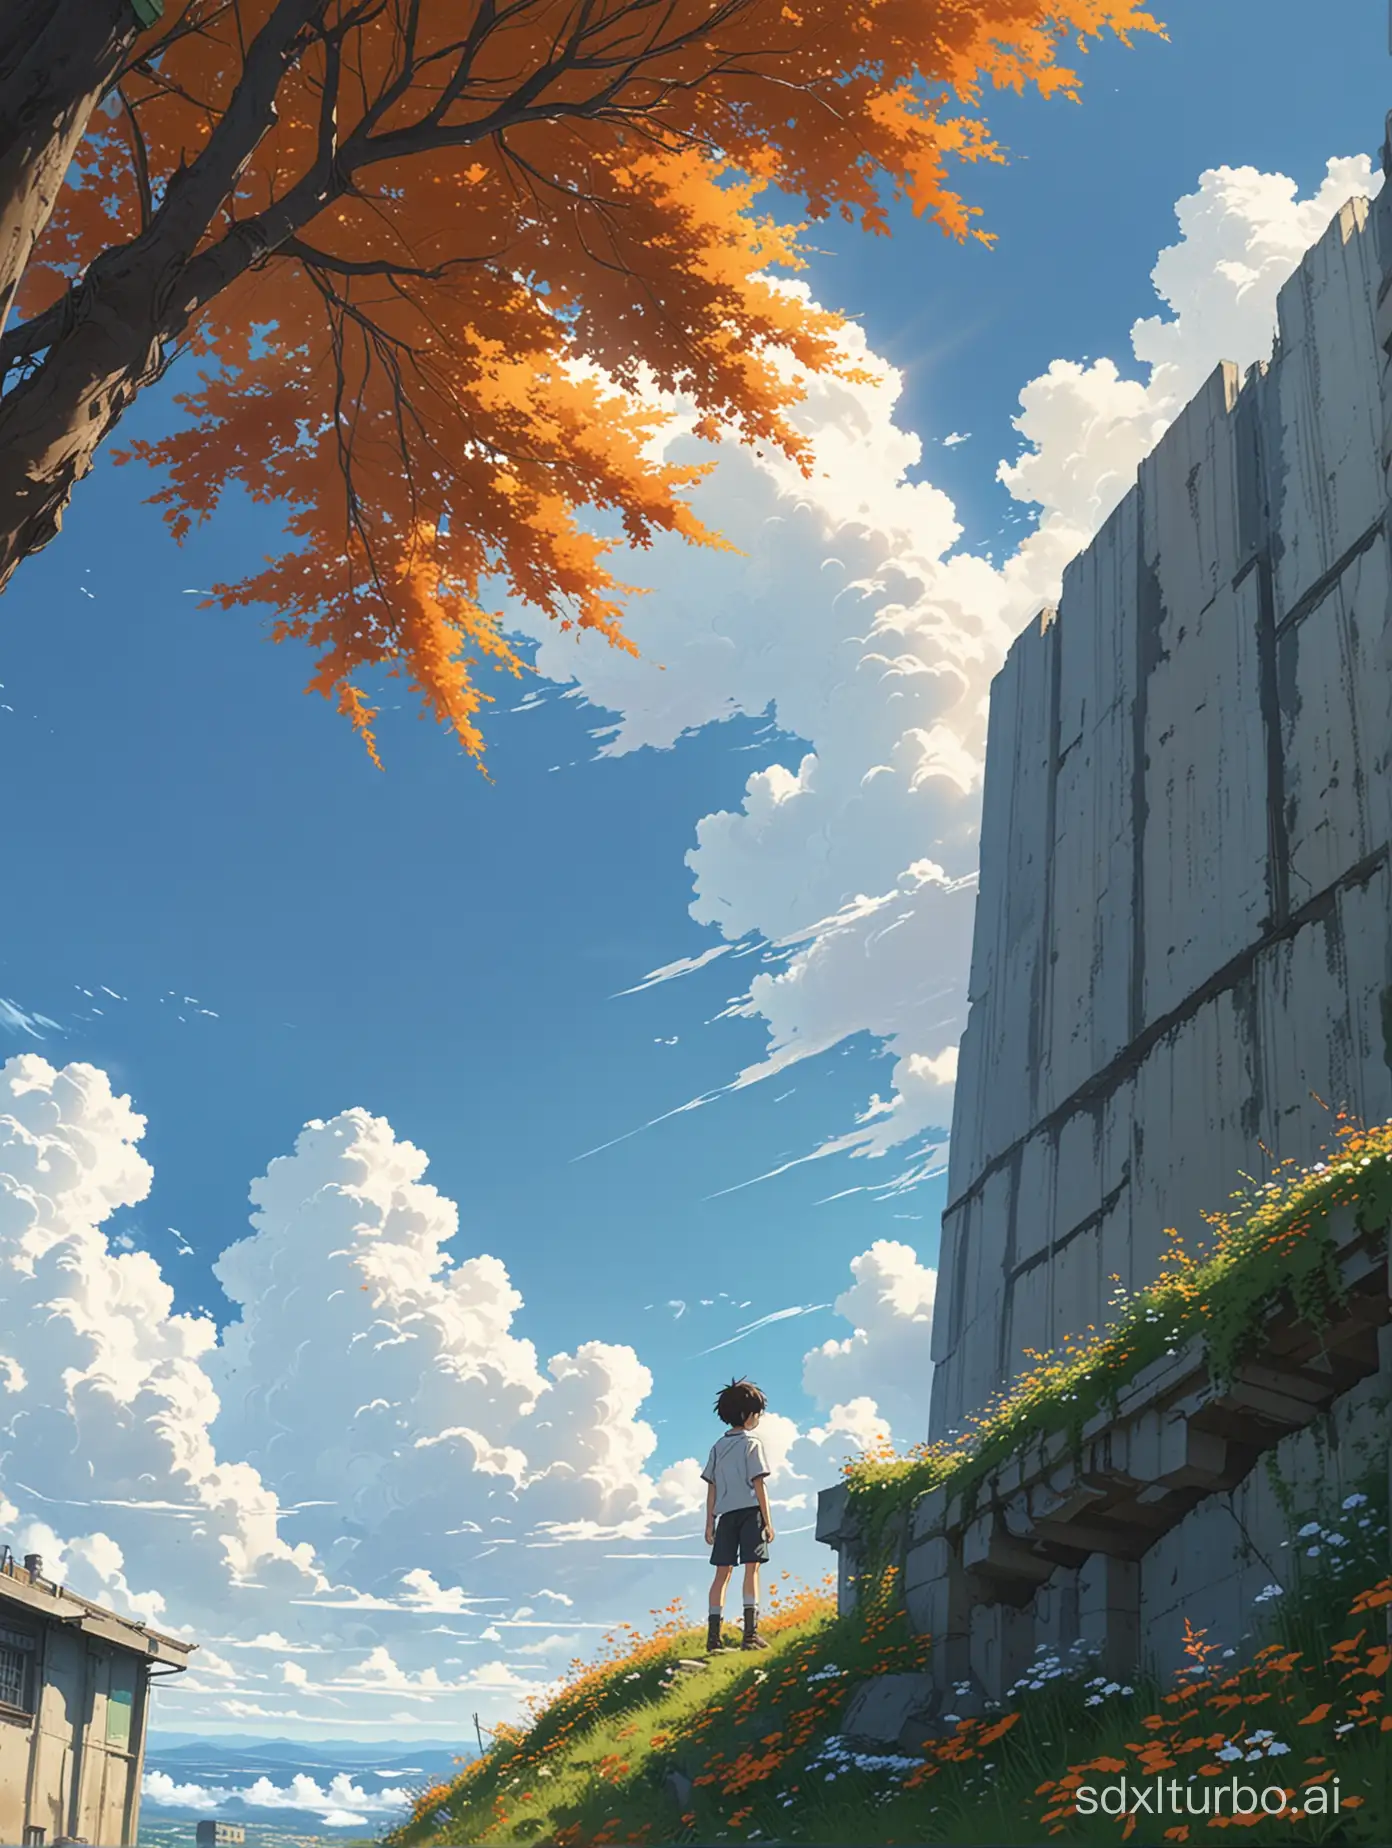 A serene Makoto Shinkai-inspired anime scene, featuring a young boy standing on edge of towering building reclaim by nature, full of grass and flowers,A tree with orange color of leaves,backround is blue sky and fluffy white clouds,high angle view,vivid